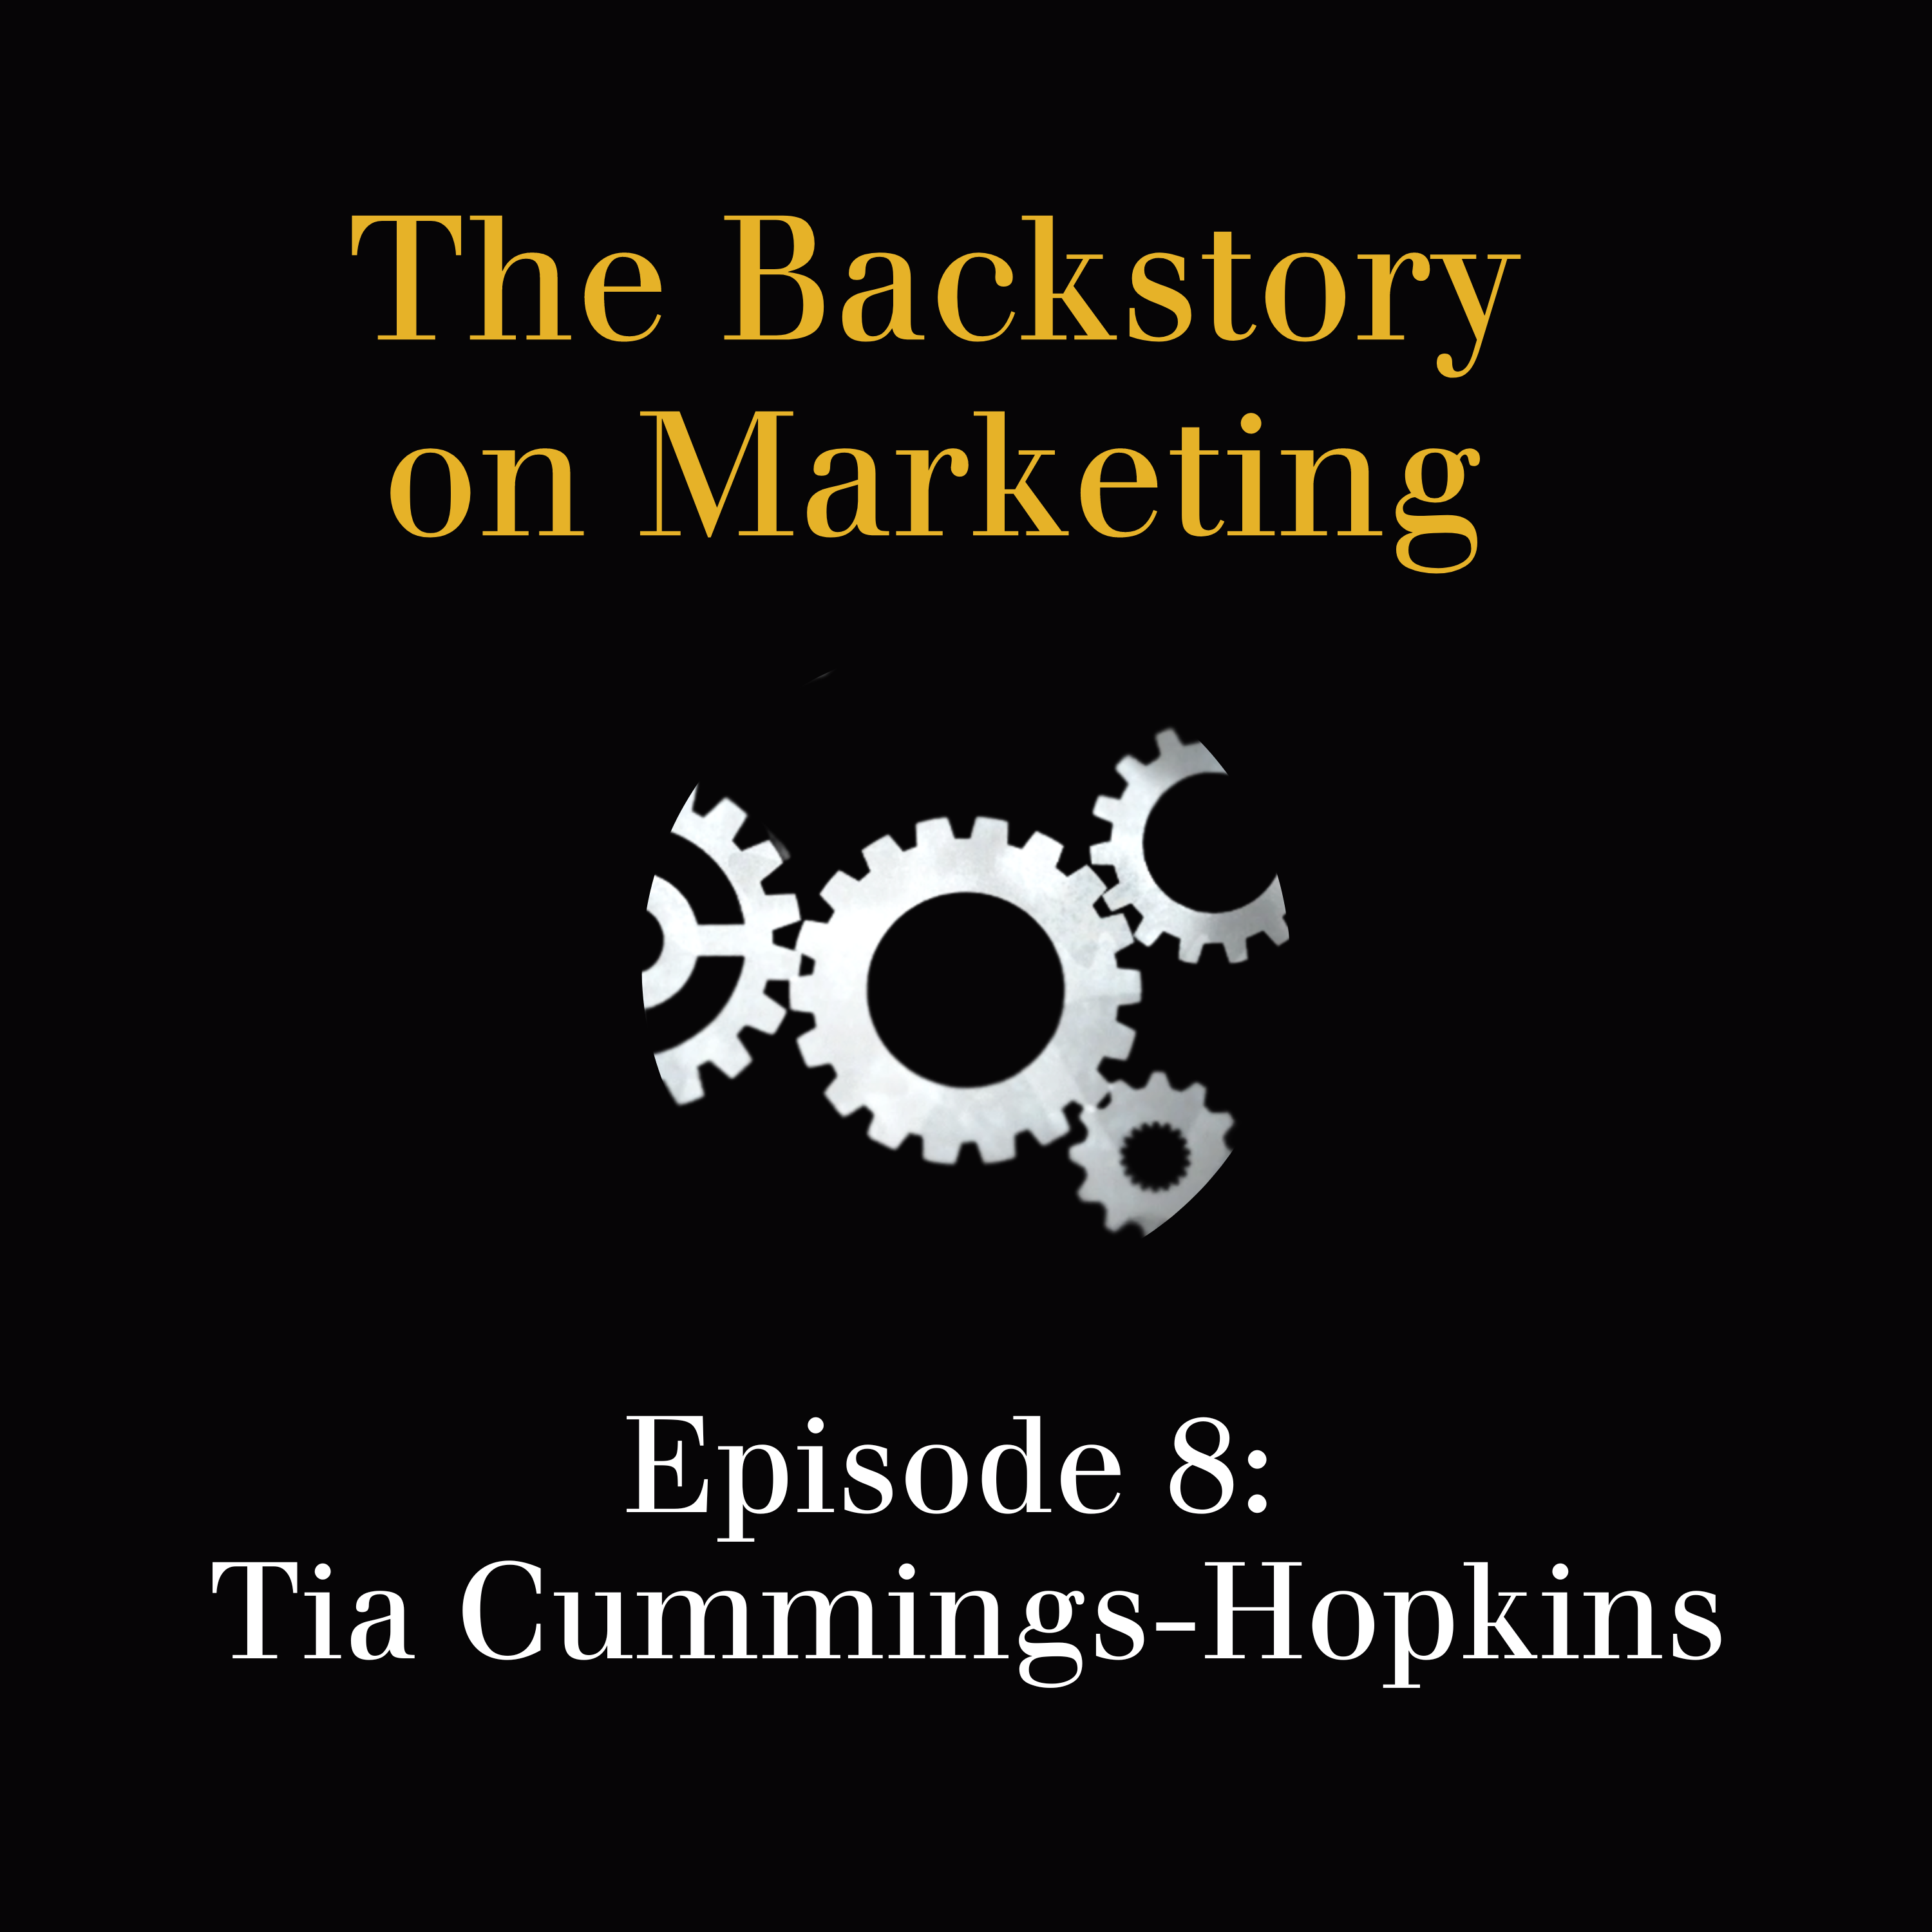 Artwork for podcast The Backstory on Marketing